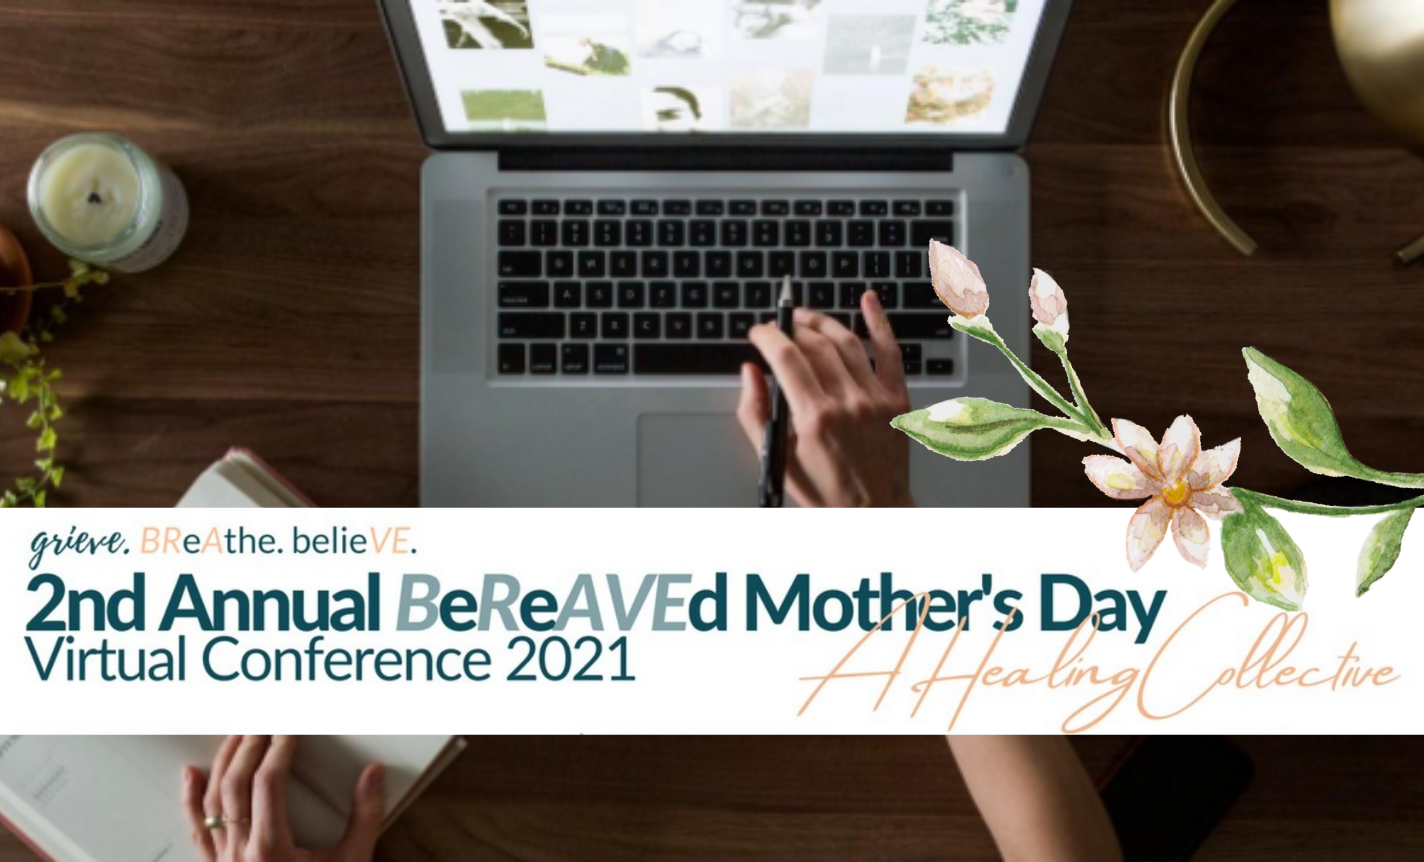 Bereaved Mother's Day: Virtual Conference